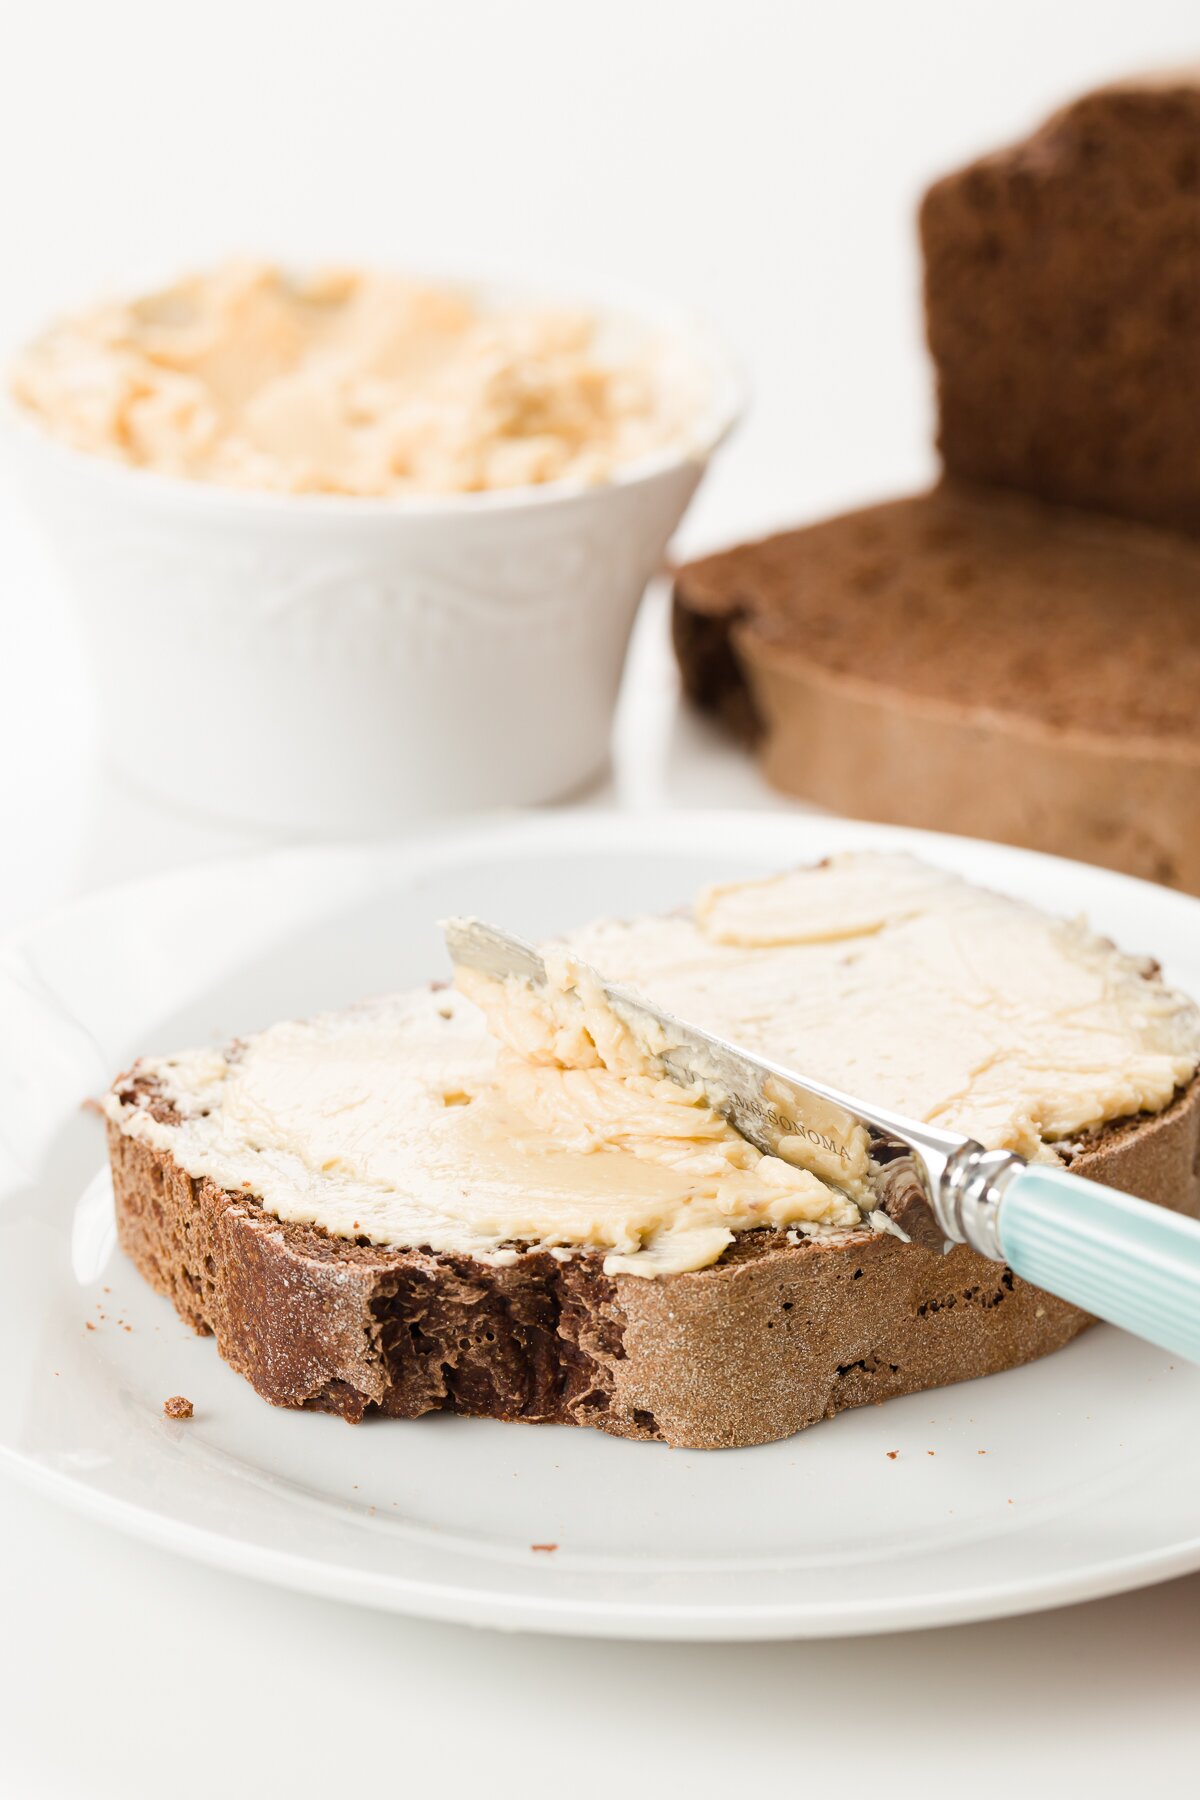 Maple butter being spread on a slice of bread with a ramekin of maple butter in the background